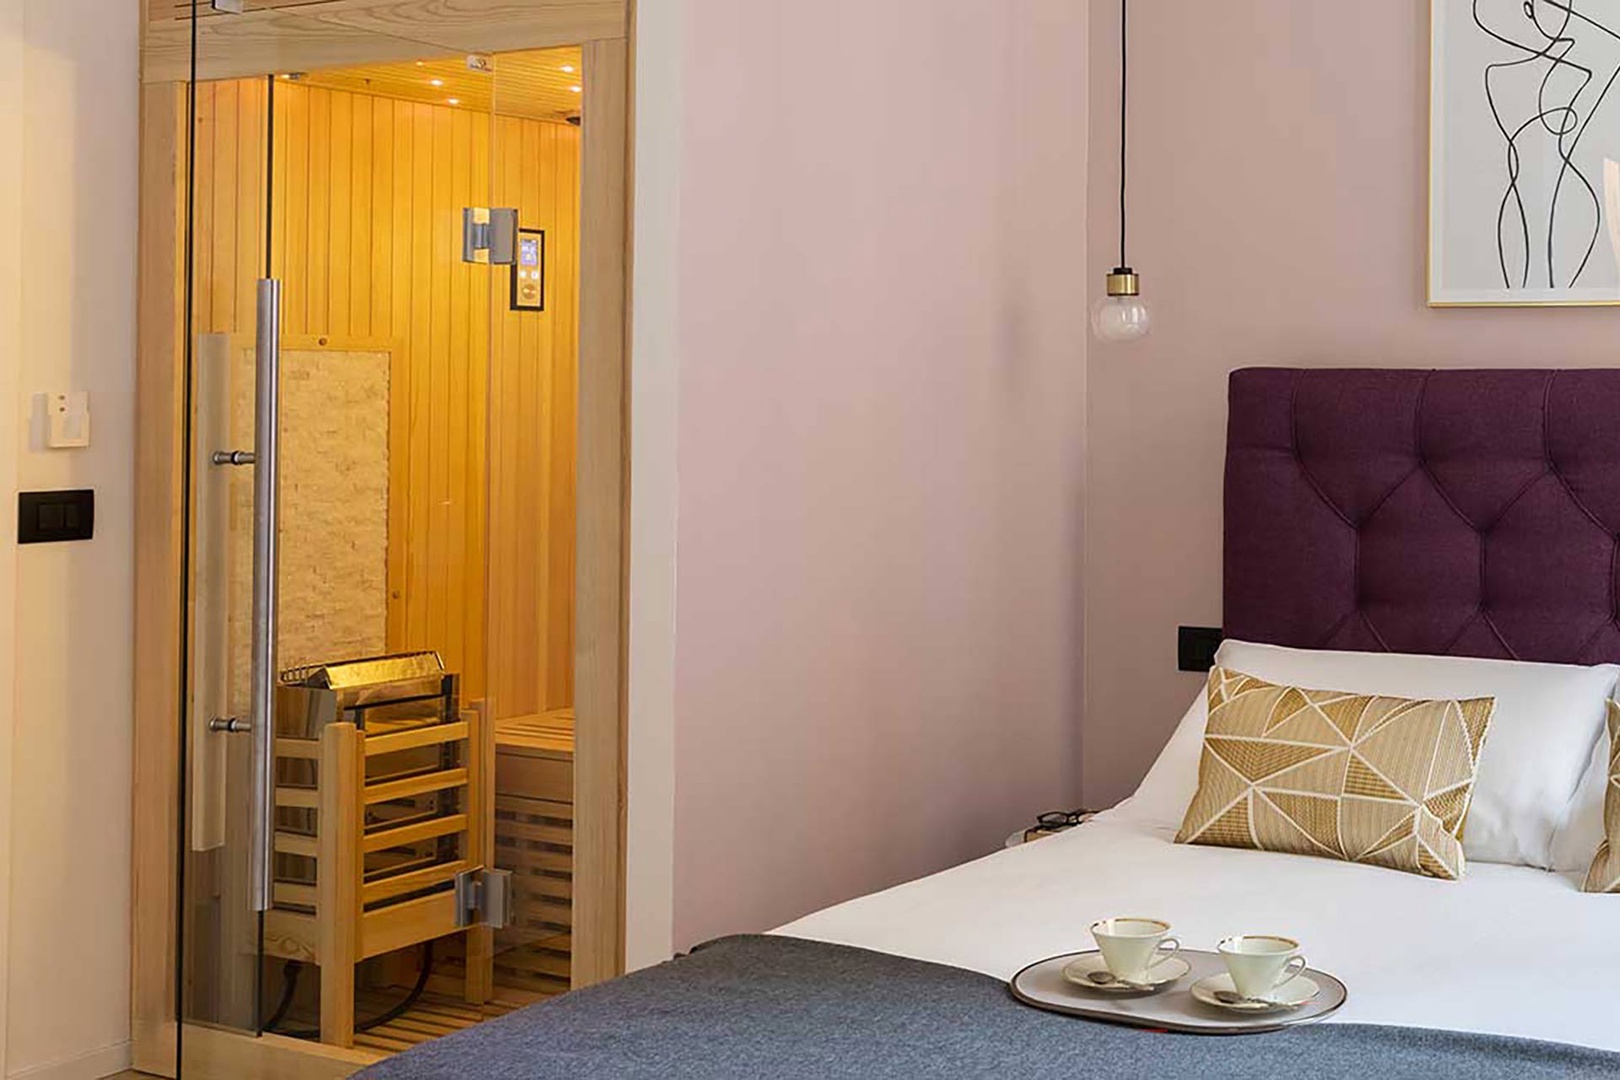 The built in sauna will allow for pampering after a long day of sightseeing.